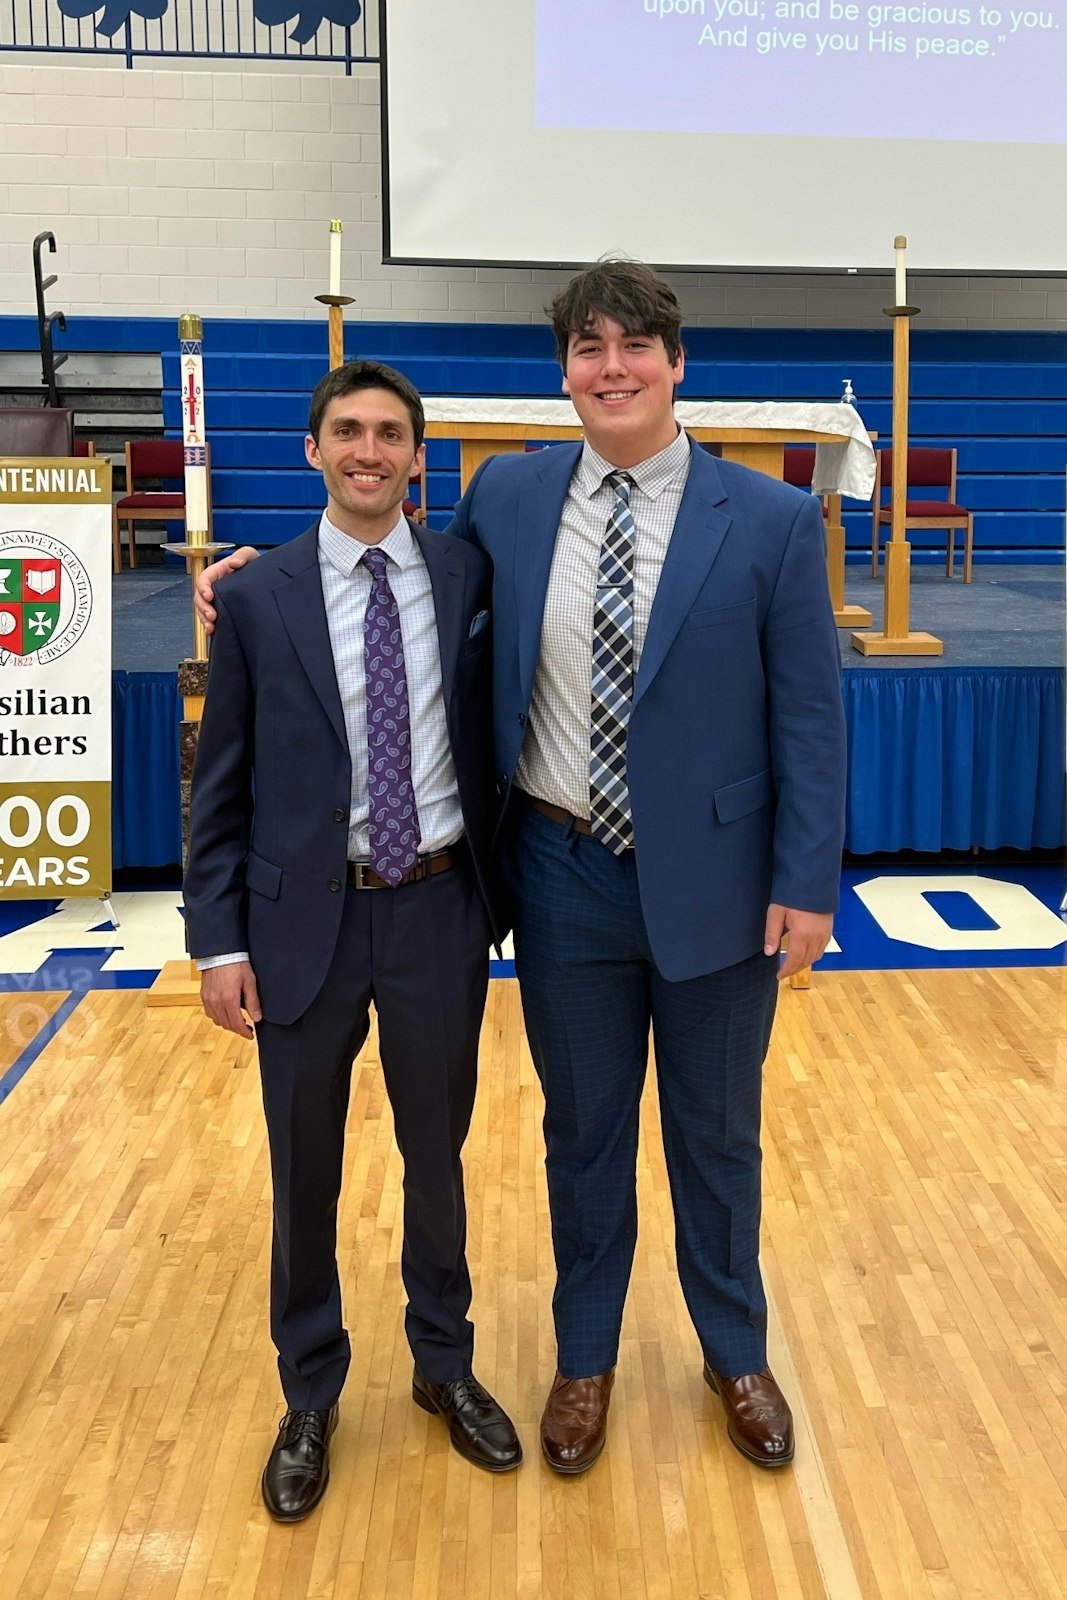 Theology teacher Colin Whitehead, left, is a Catholic Central alumnus who served on the formation team and was Keeley's confirmation sponsor. (Photo courtesy of Colin Whitehead)